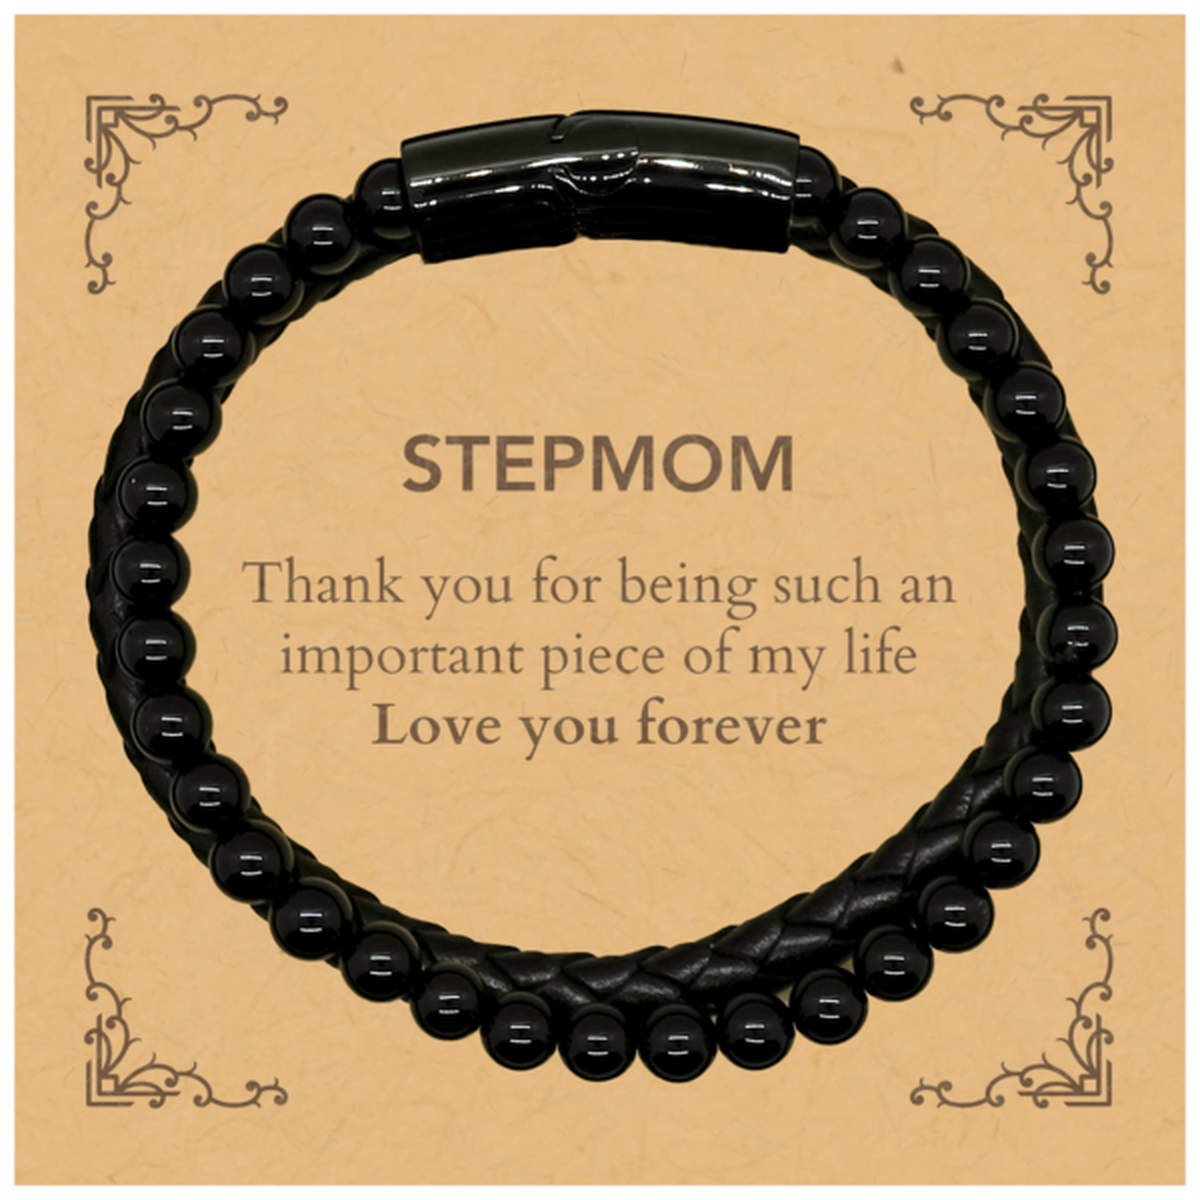 Appropriate Stepmom Stone Leather Bracelets Epic Birthday Gifts for Stepmom Thank you for being such an important piece of my life Stepmom Christmas Mothers Fathers Day